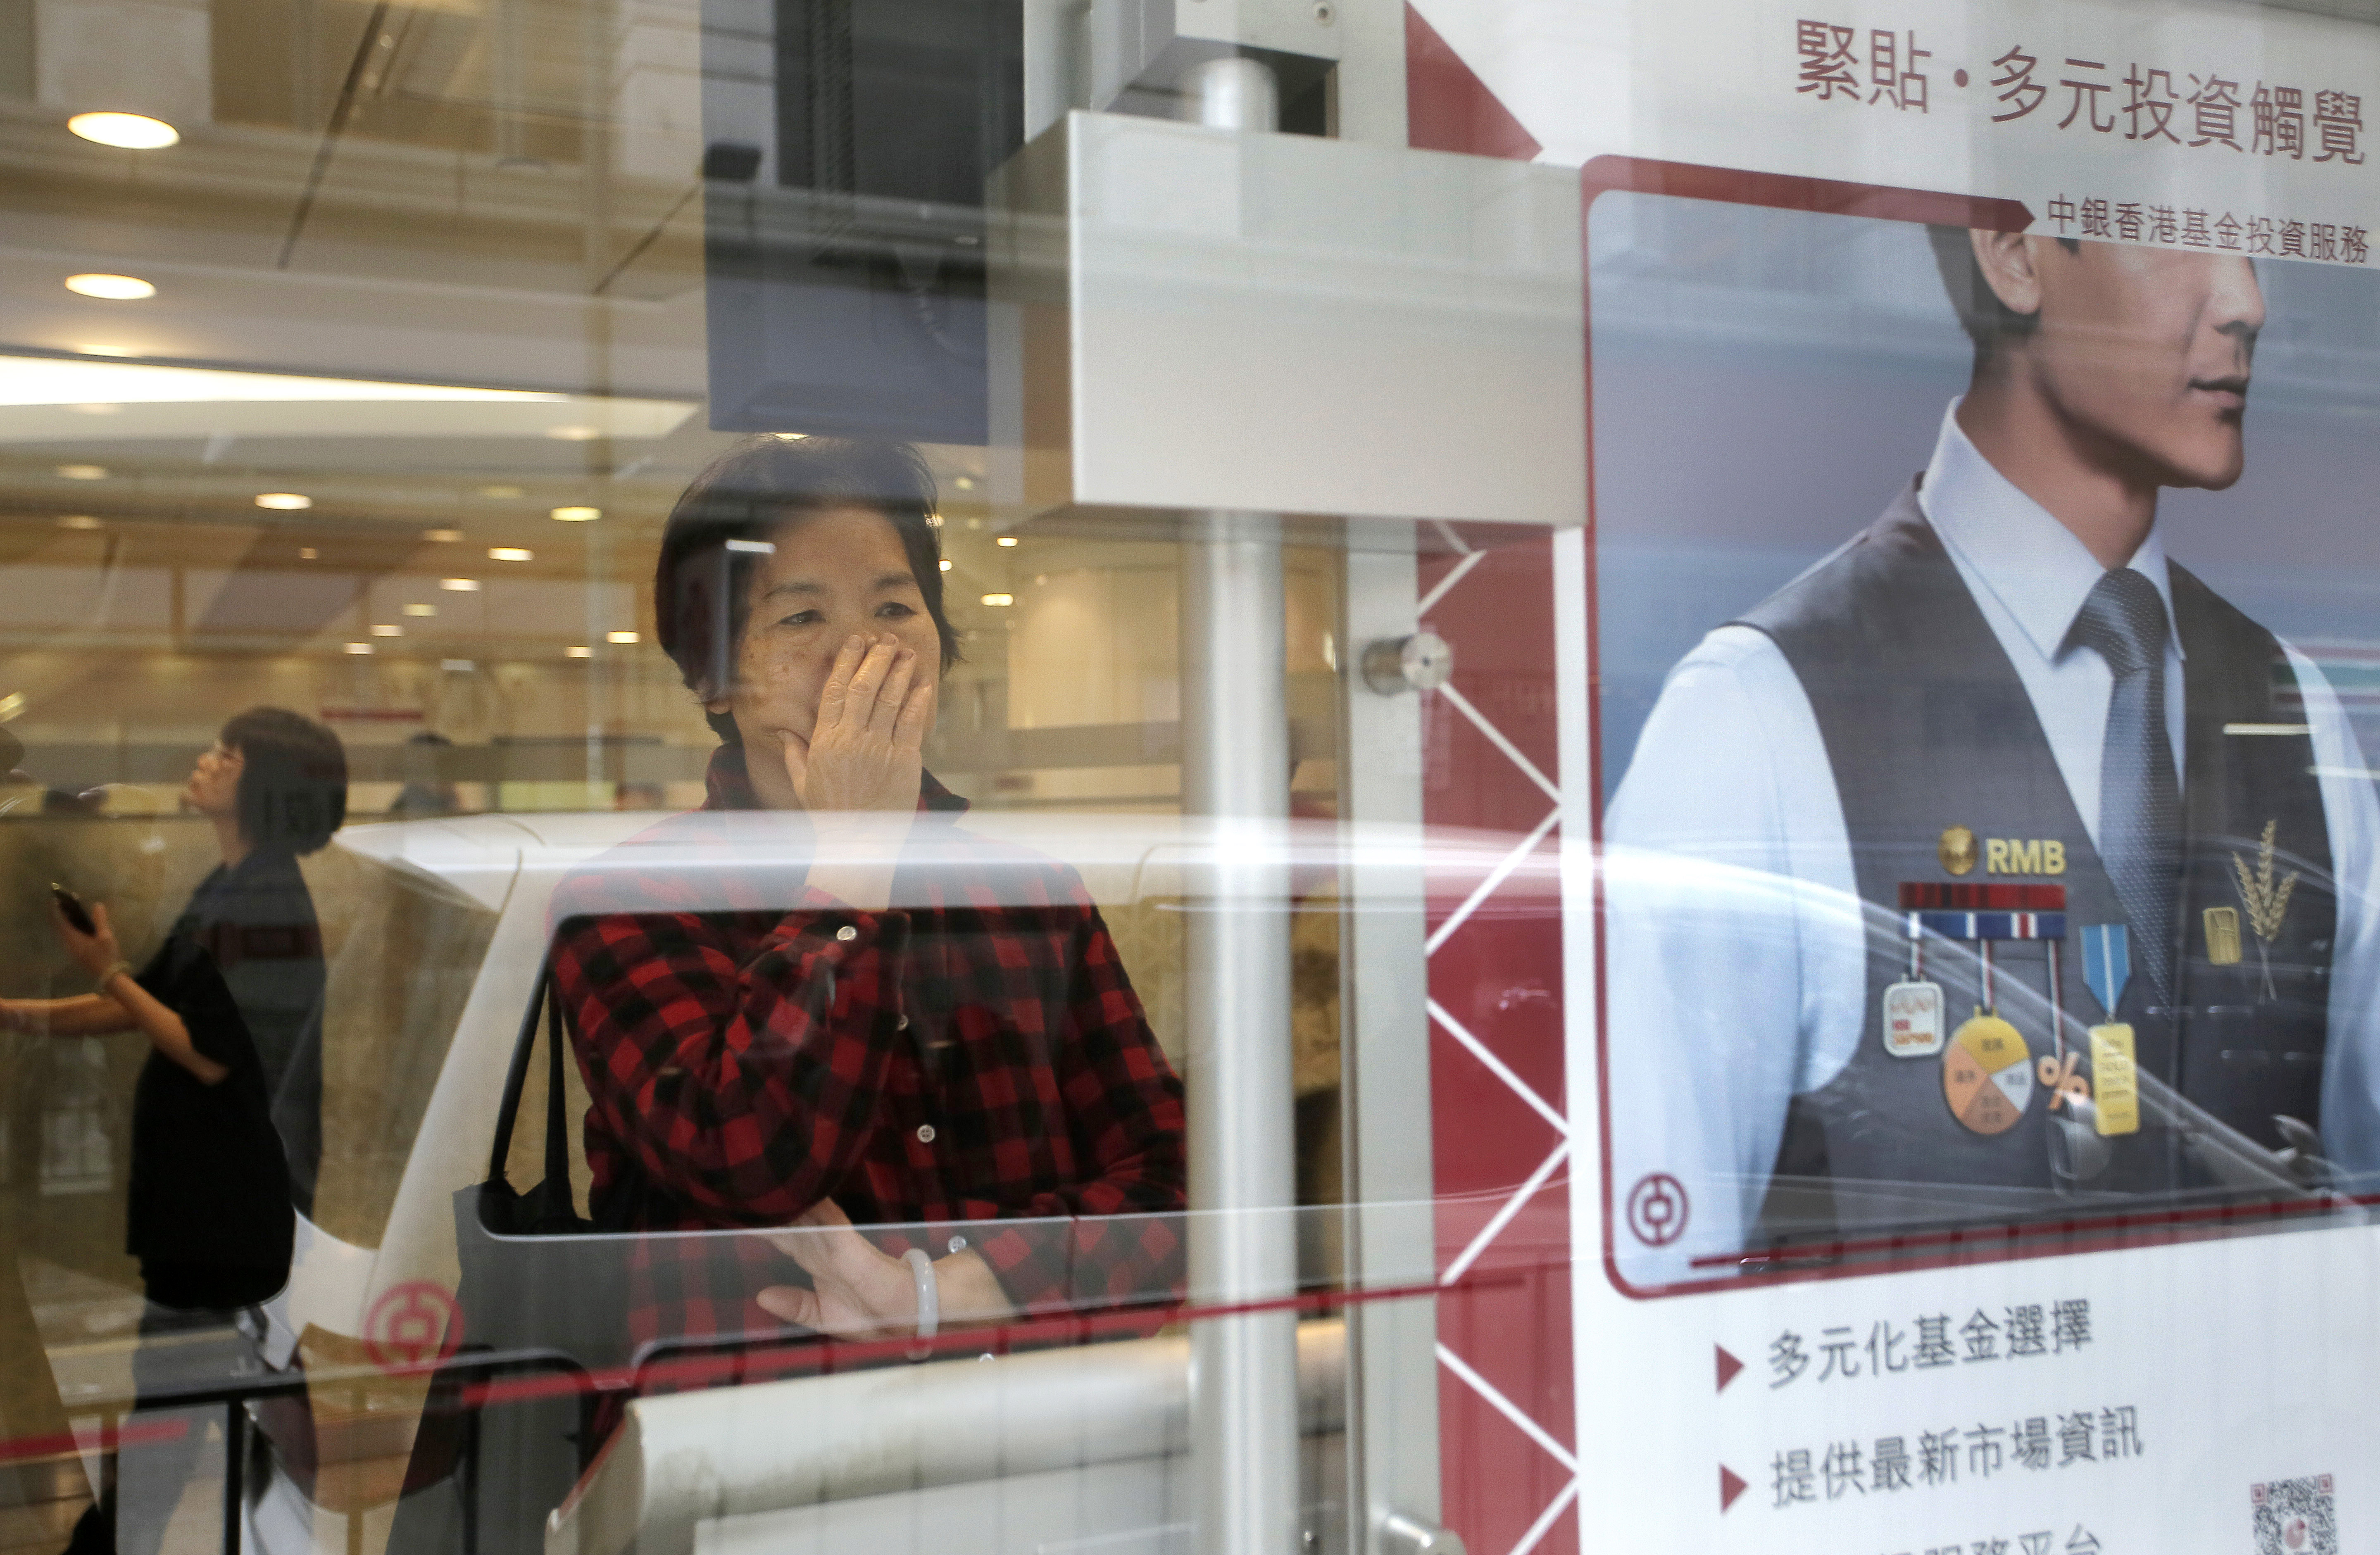 A woman looks at a computer screen showing the Hong Kong share indexes at a local bank in Hong Kong, Thursday, Jan. 7, 2016. Chinese stocks nosedived Thursday, triggering their second daylong trading halt this week and sending share markets, Asian currencies and oil prices lower as investor jitters rippled across the globe. (AP Photo/Vincent Yu)